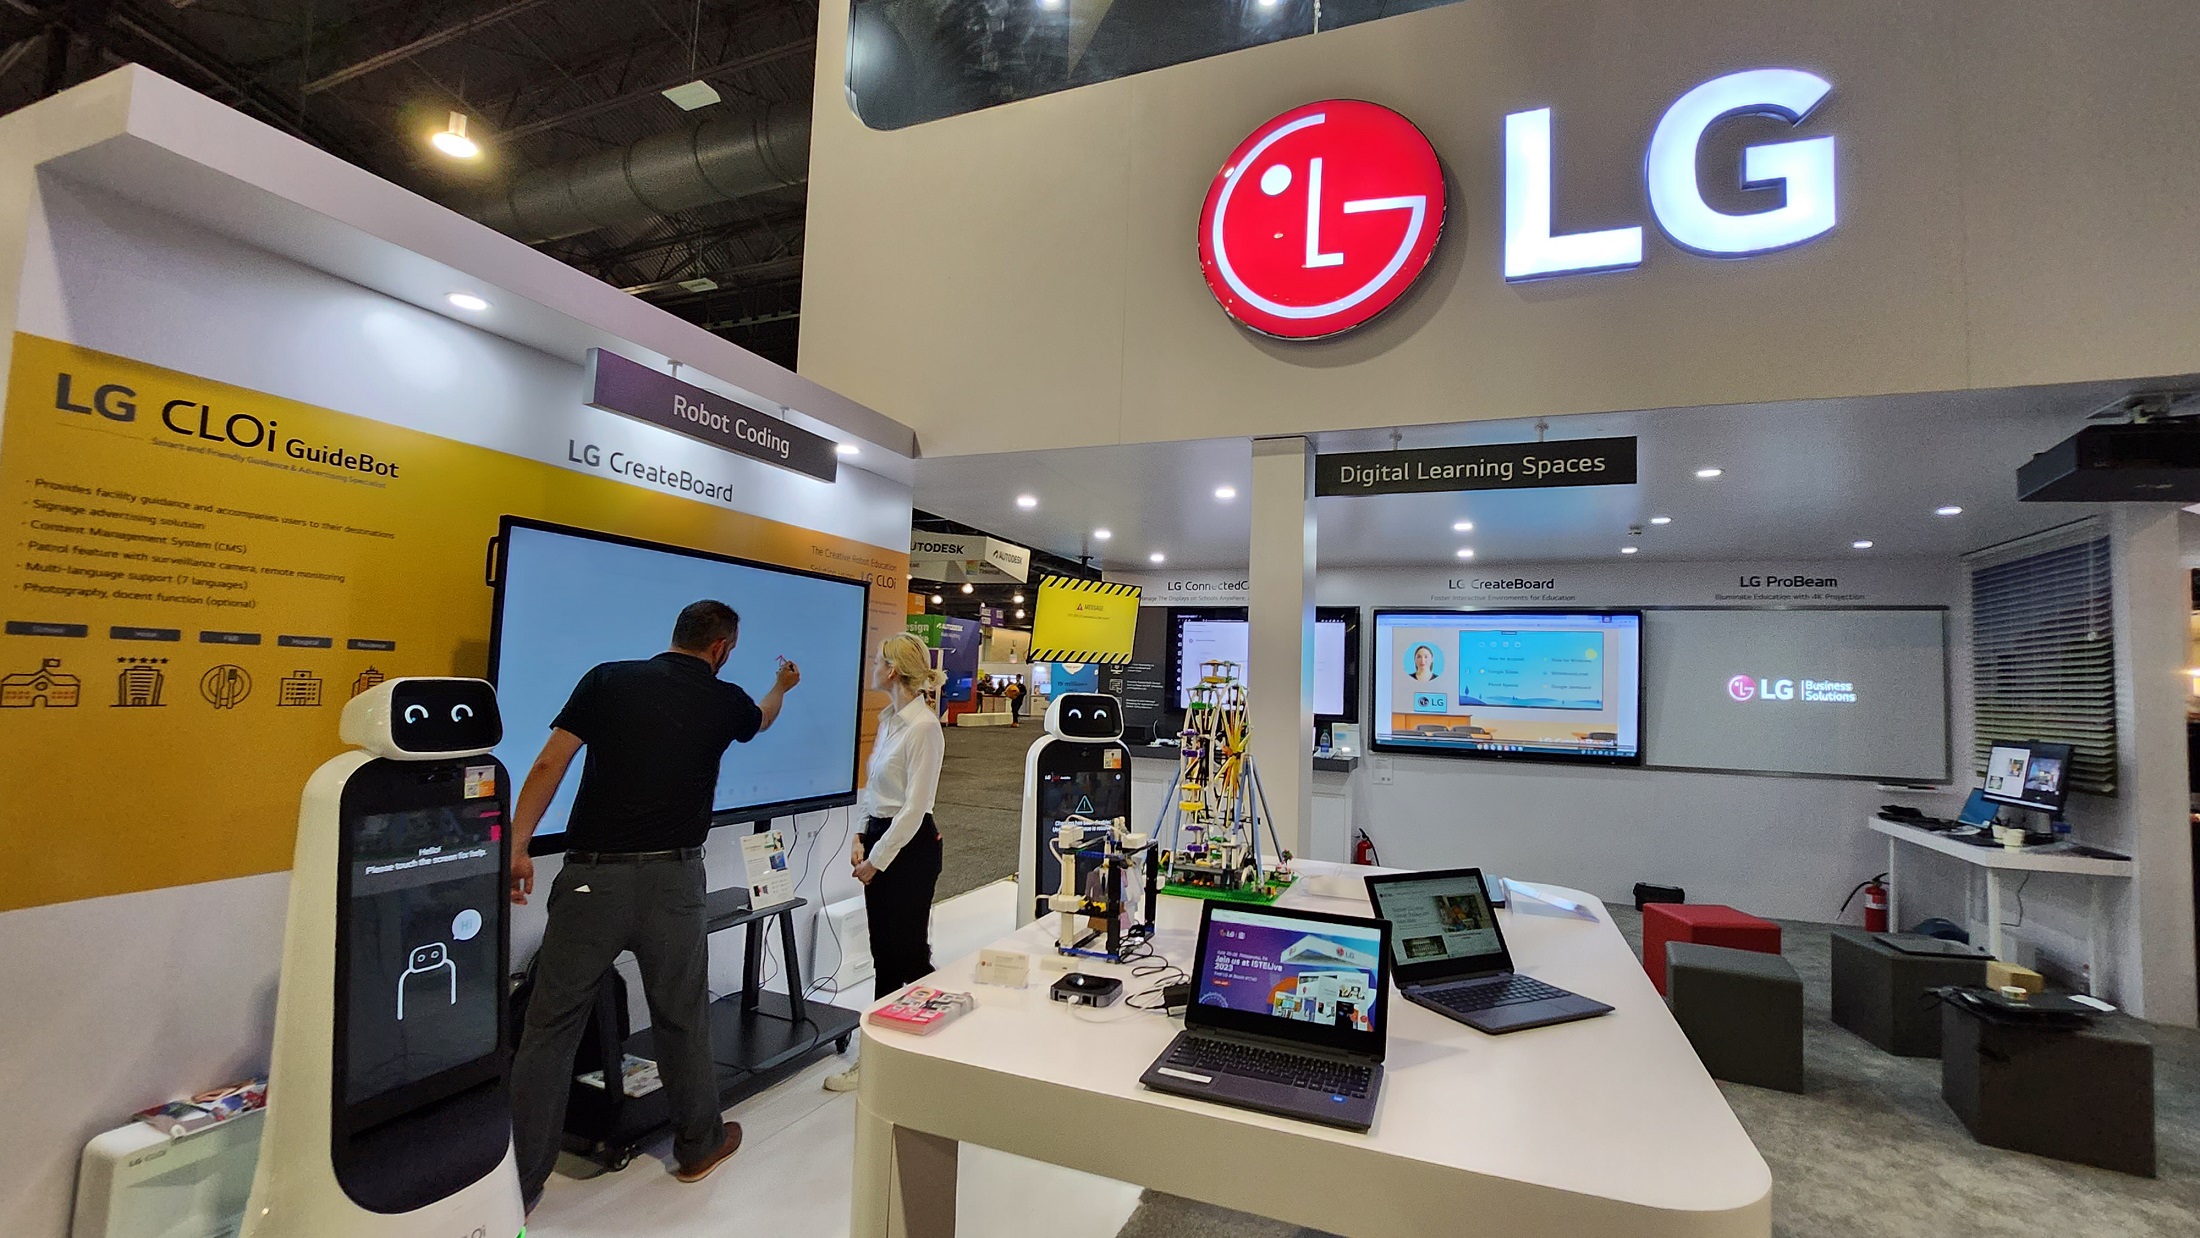 People experiencing Robot Coding Zone of LG booth